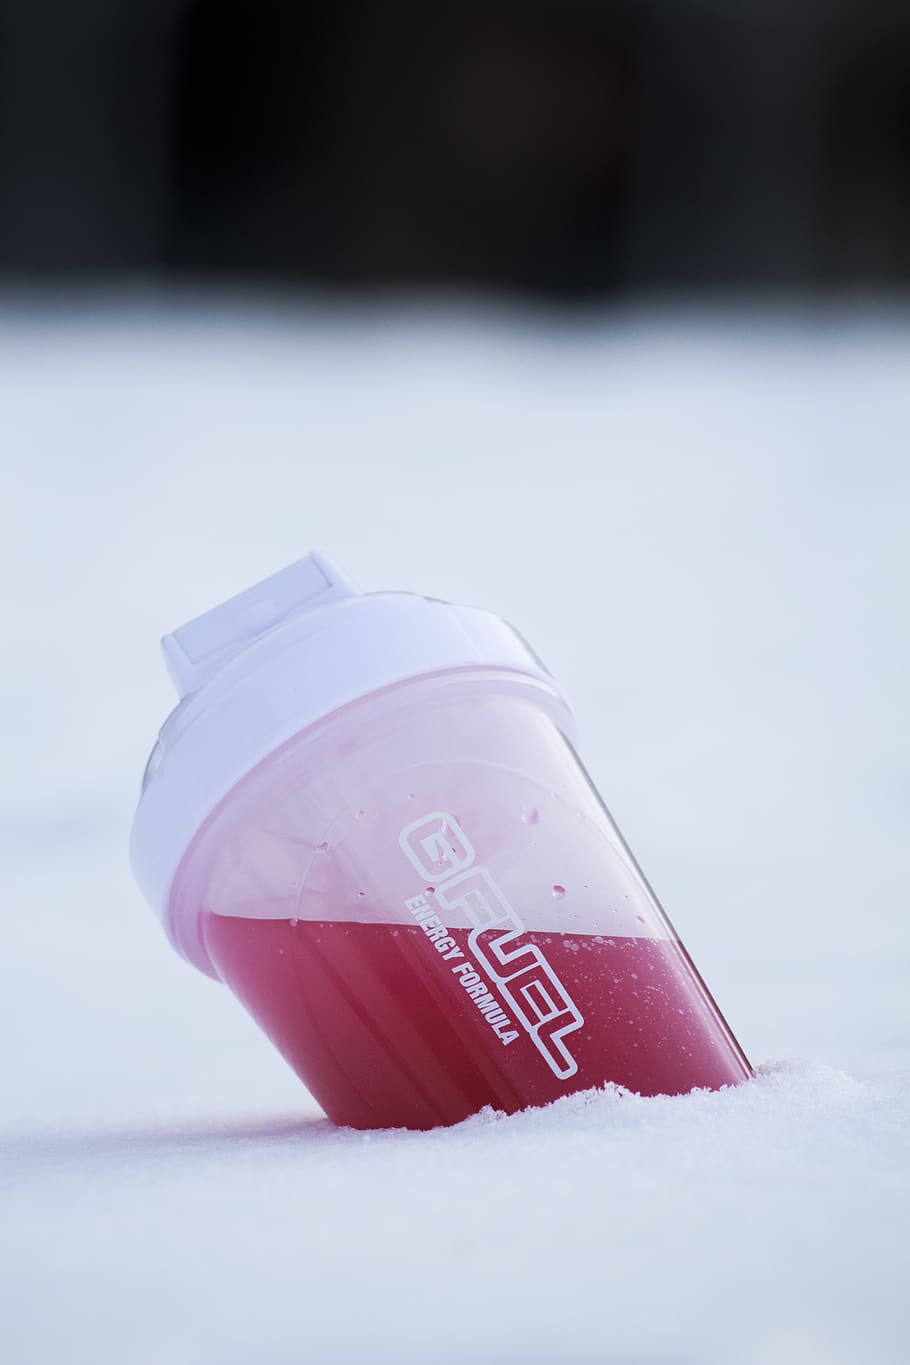 Filled Clear Gfuel Bottle On Ice, Close-up, Snow, Cold - HD Wallpaper 